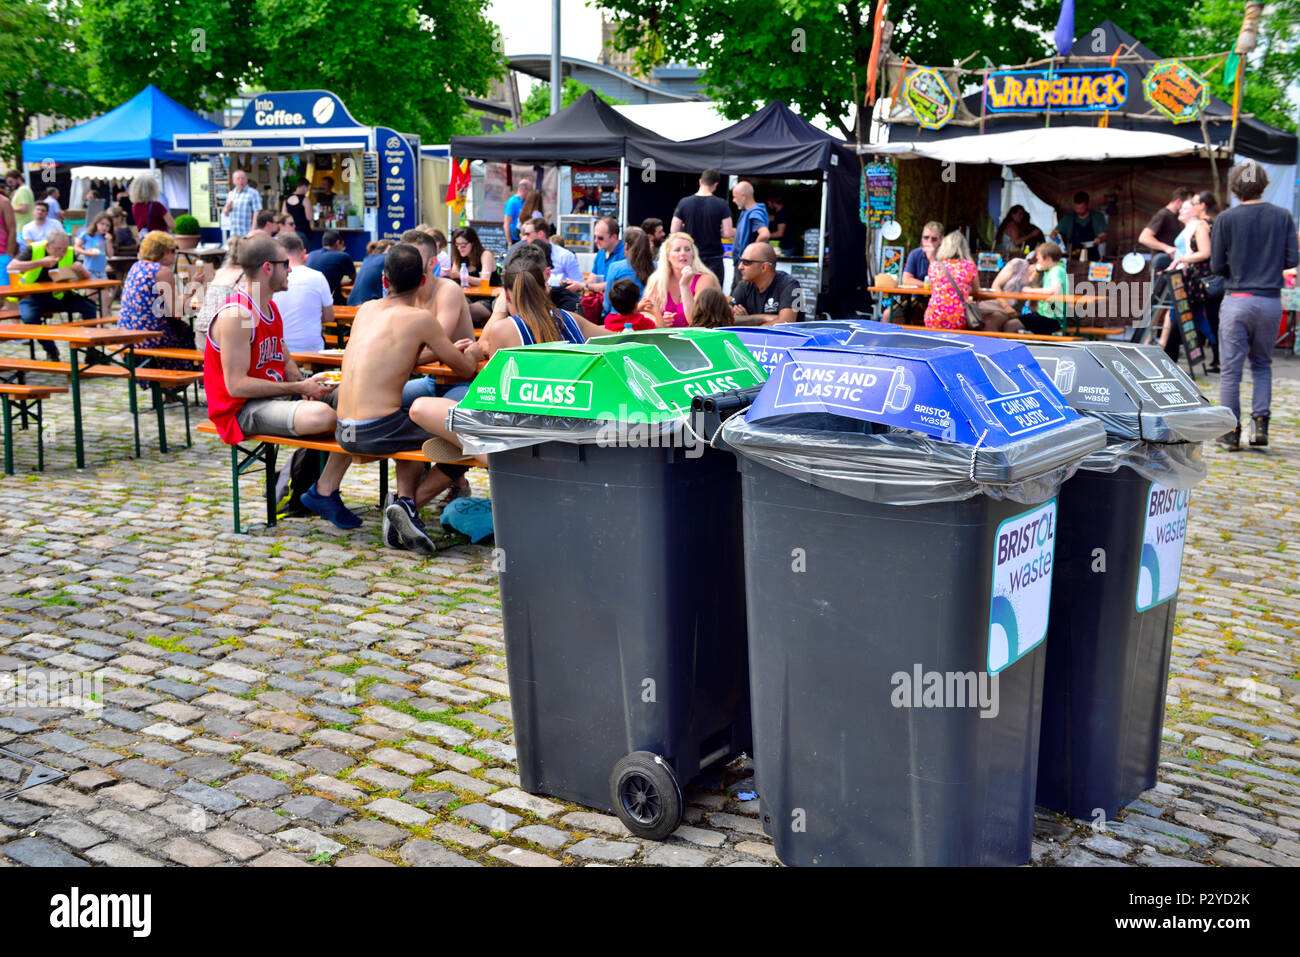 Rubbish and recycling bins out in Bristol Waterfront Square during festival, UK Stock Photo